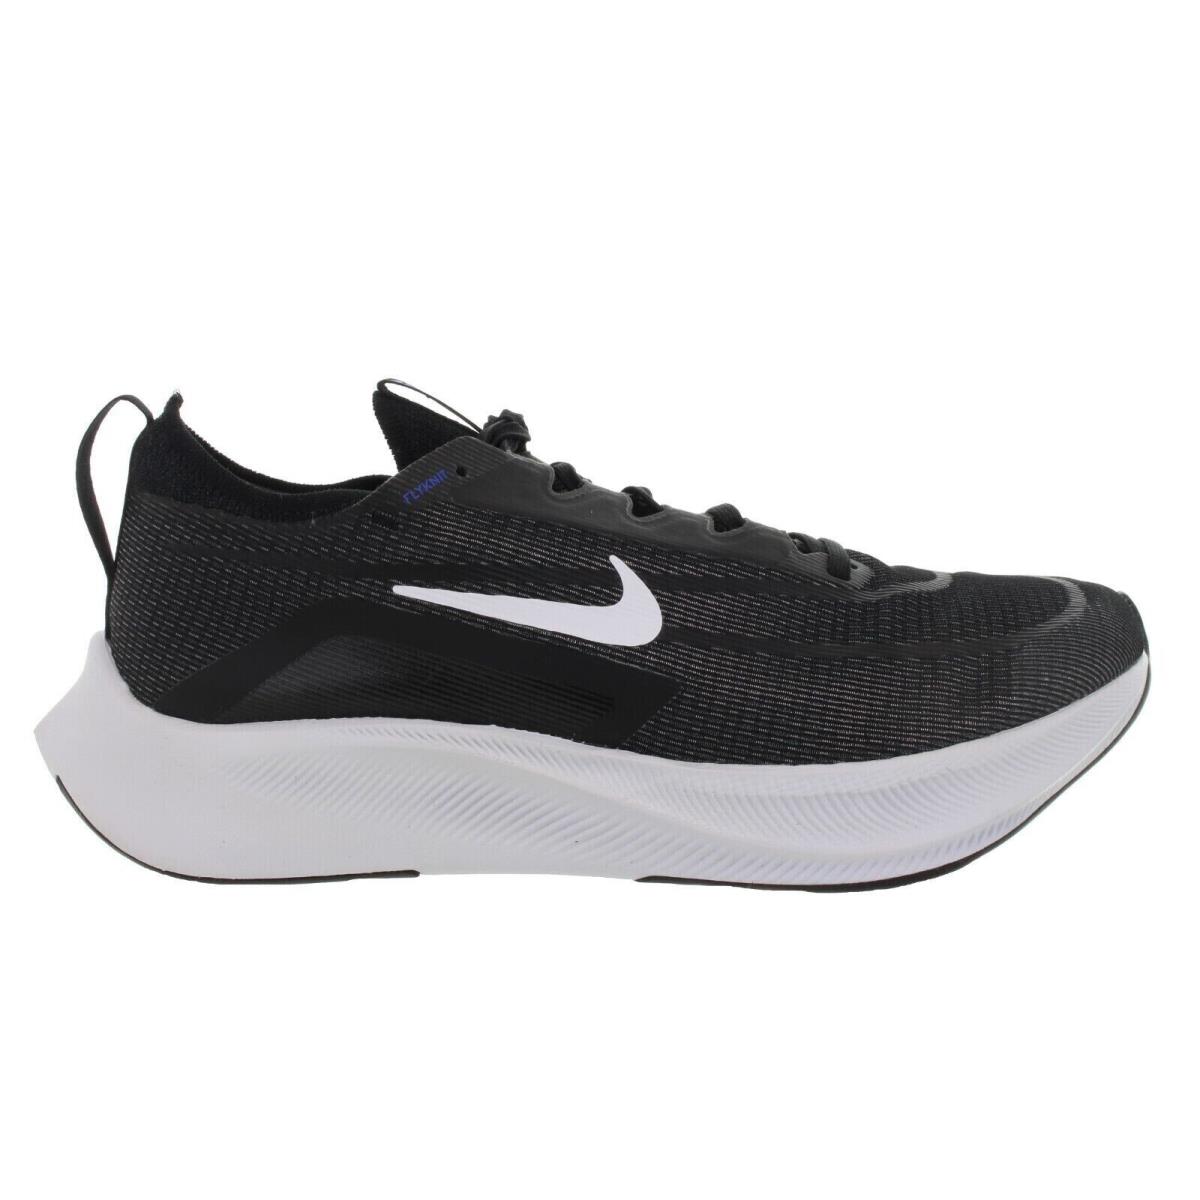 Nike Zoom Fly 4 Black White Anthracite Grey Blue Shoes CT2392-001 Men`s 10 - Black